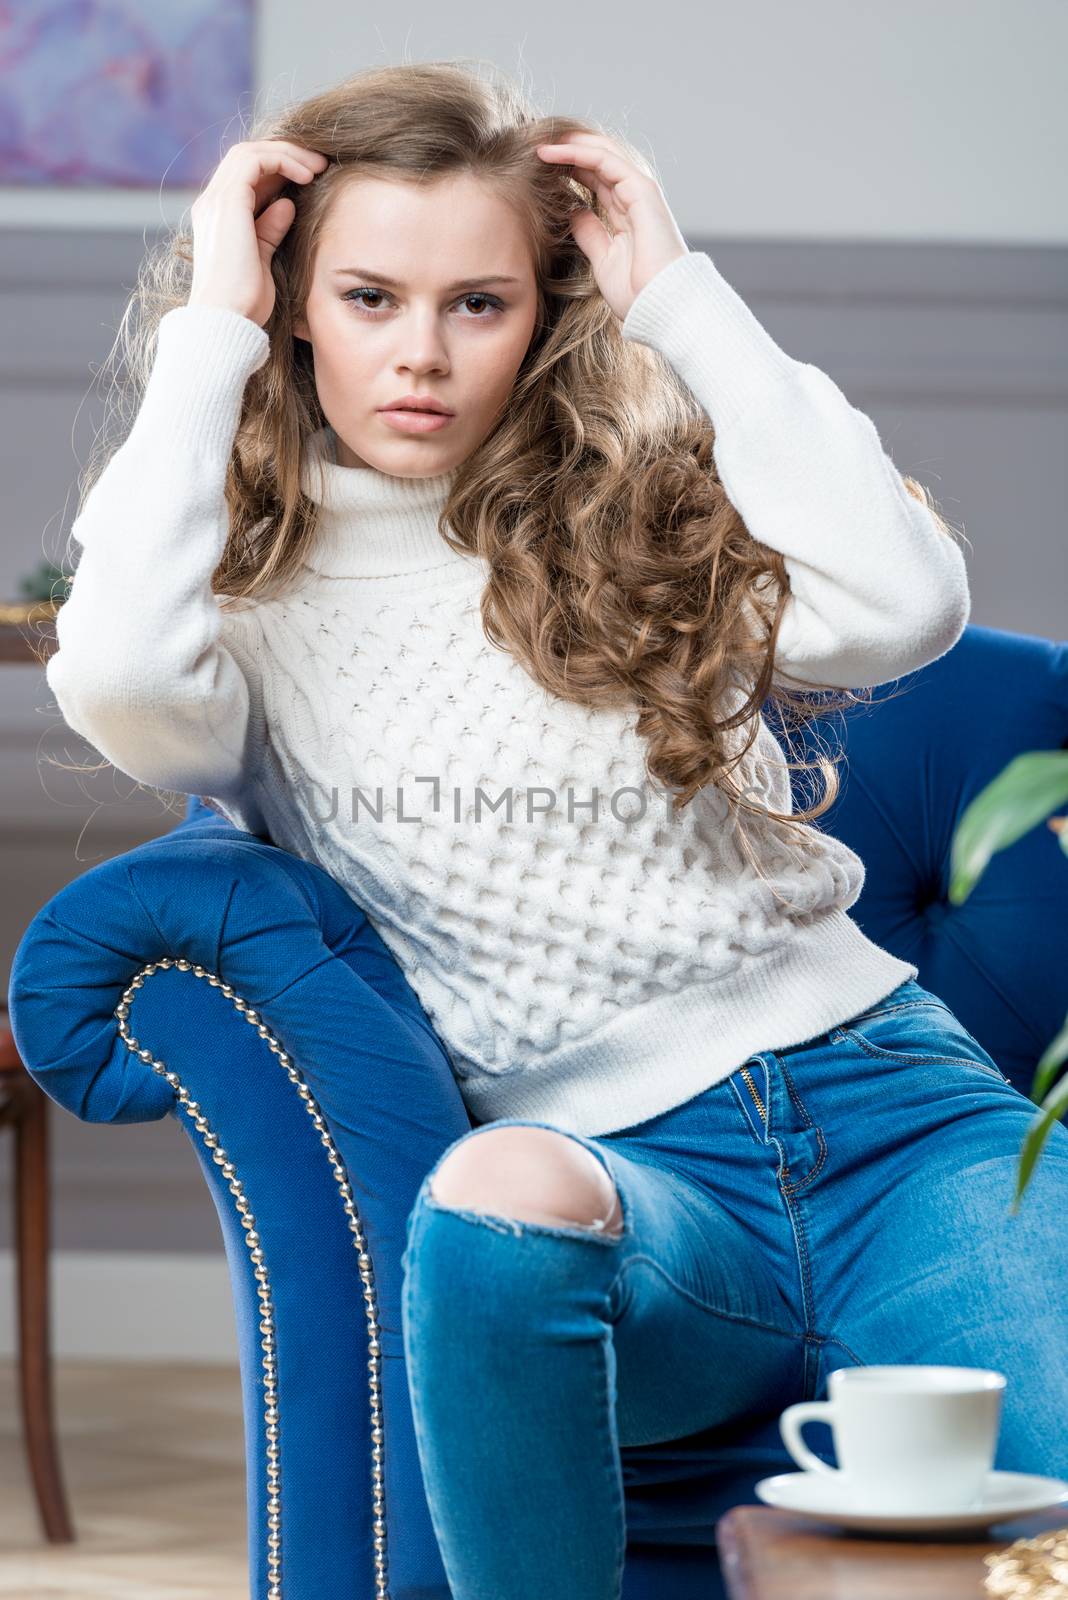 charming young girl sitting in living room on blue couch and posing